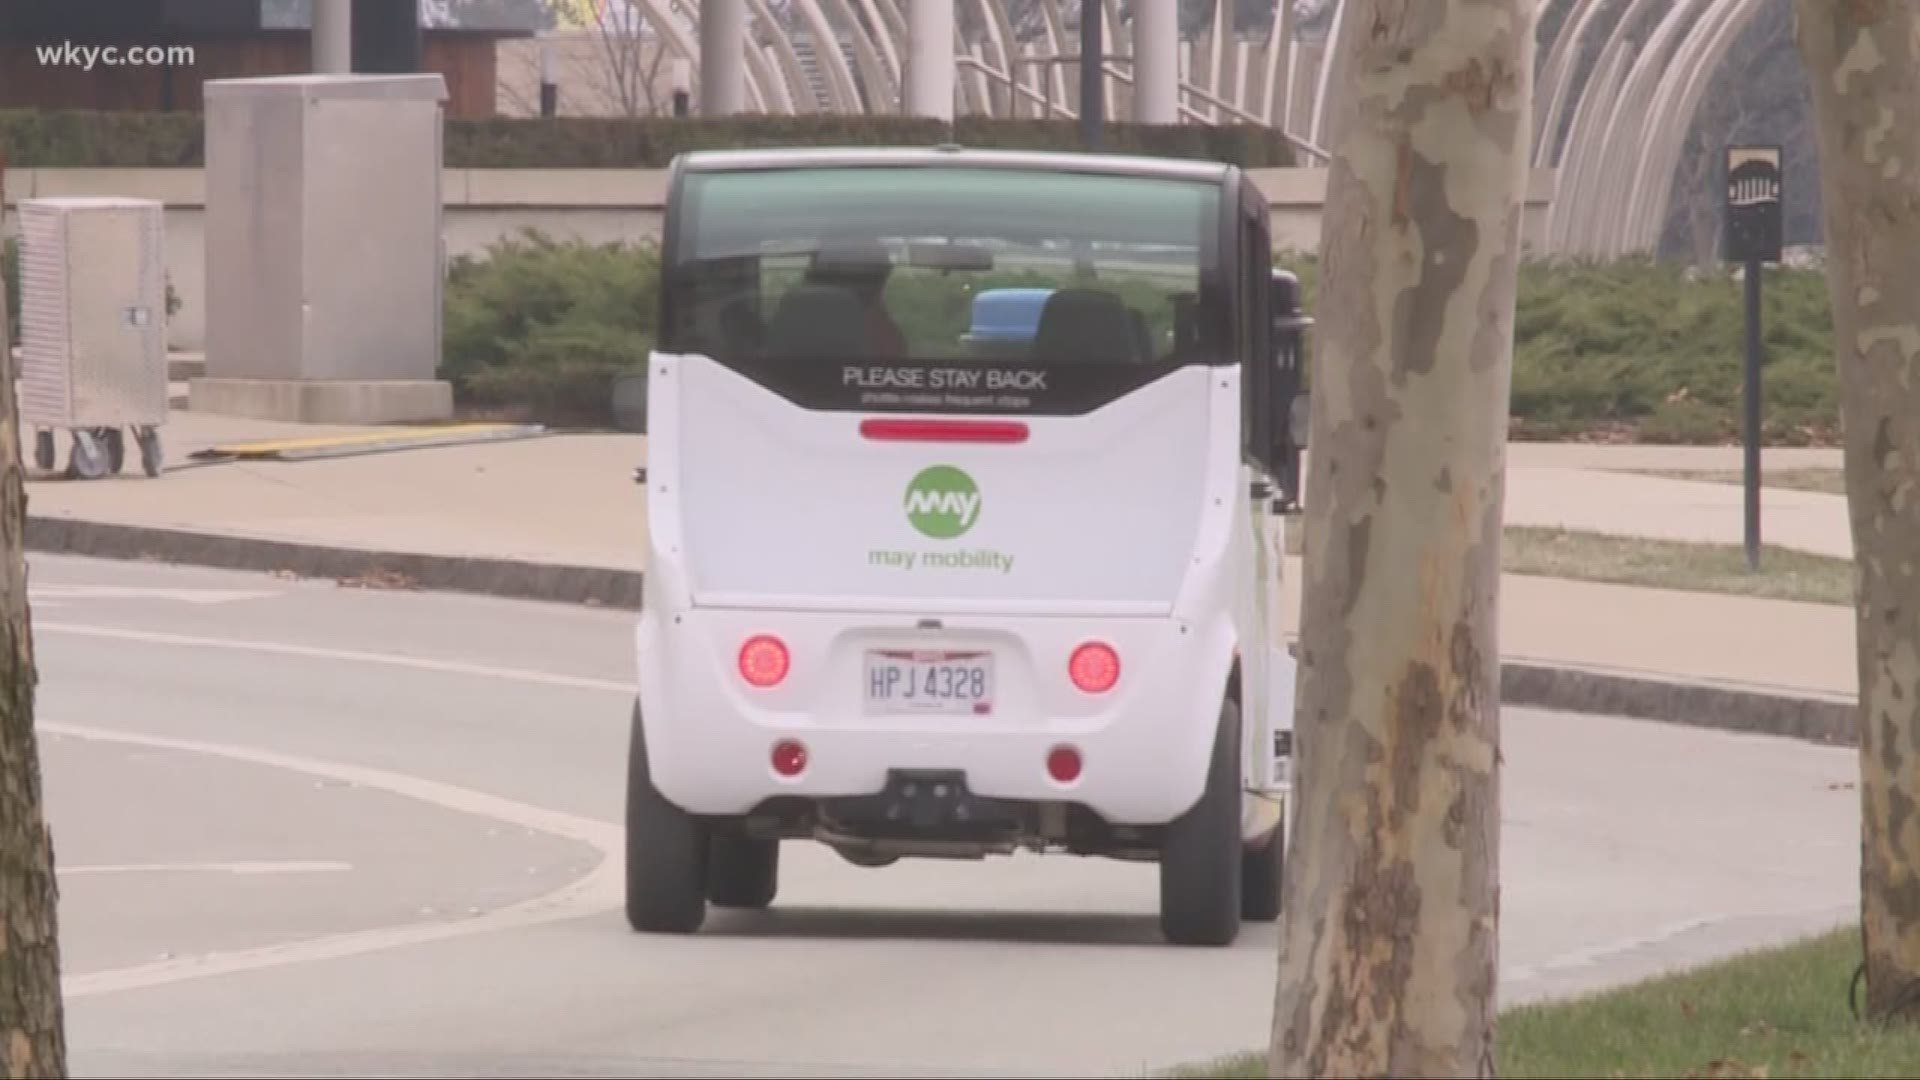 Ohio’s first self-driving shuttle is now open in Columbus